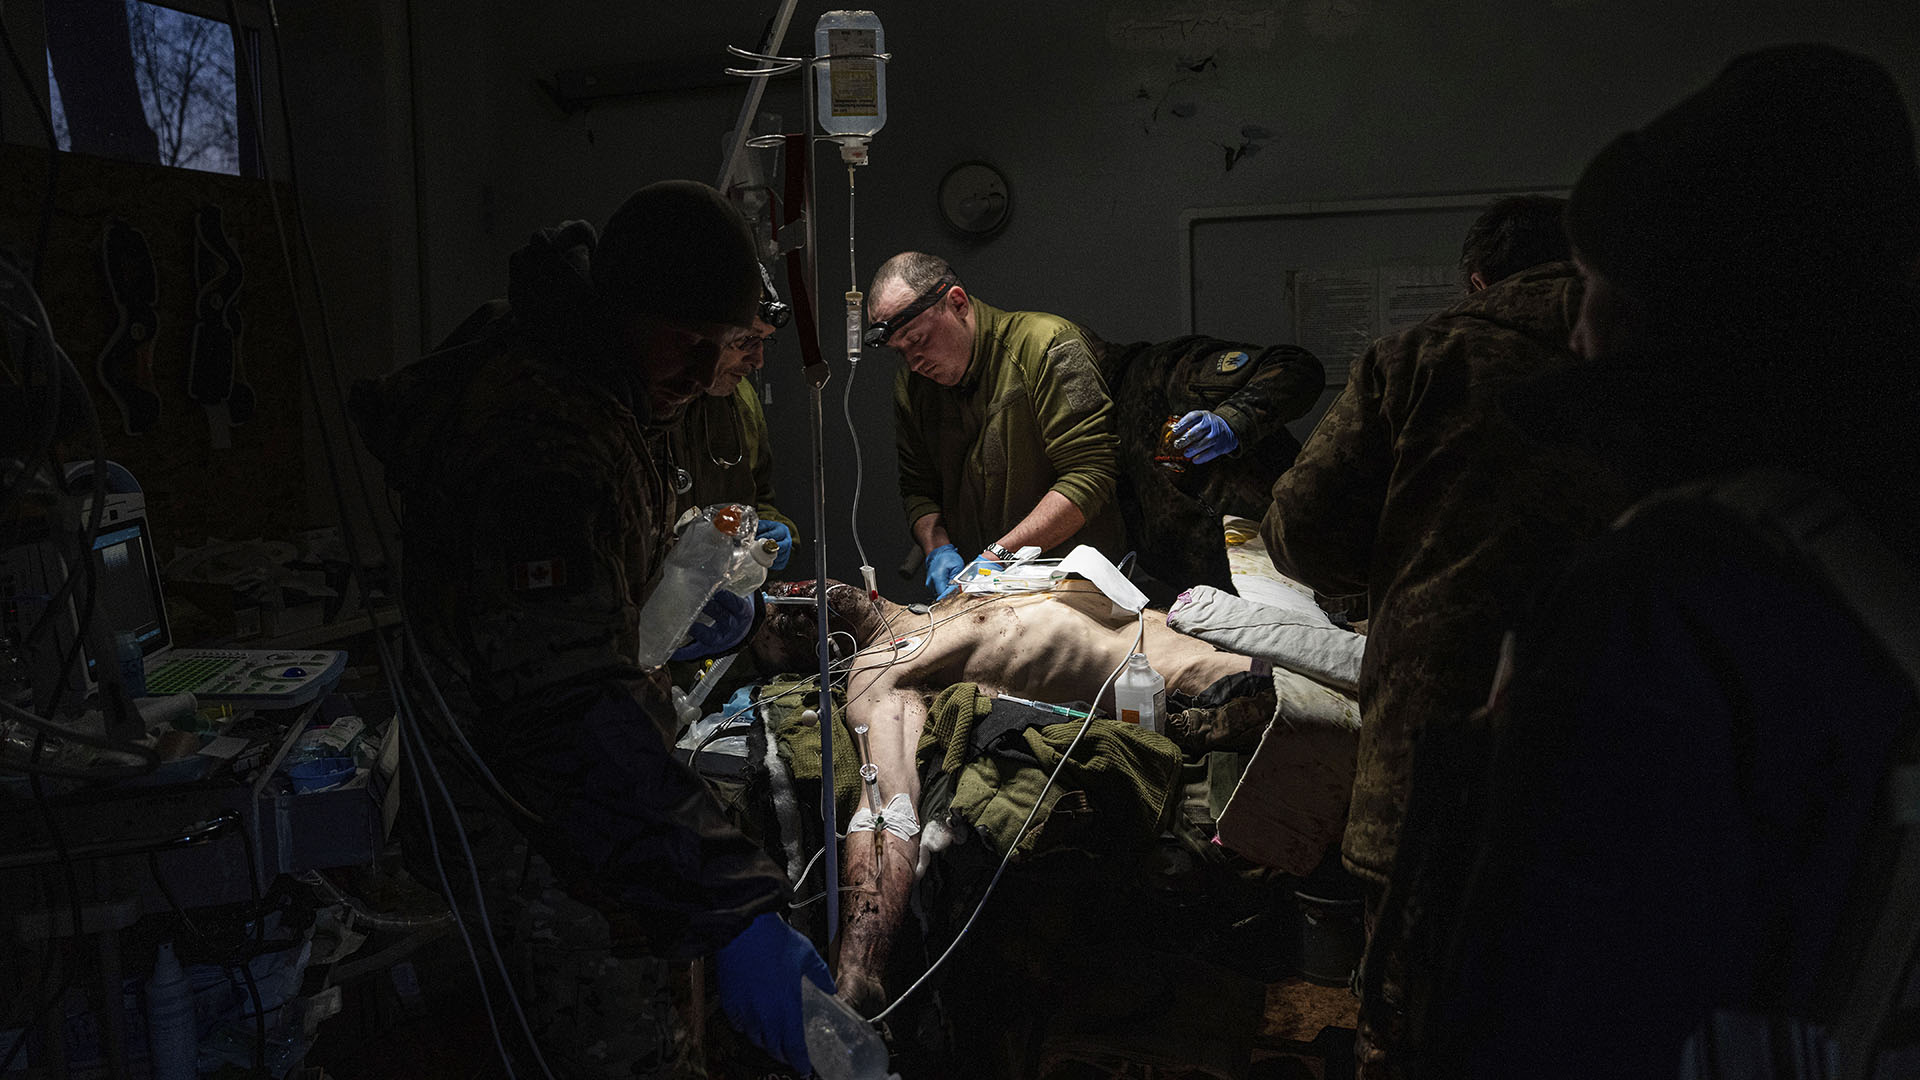 Ukrainian military medics treat their wounded comrade who was evacuated from the battlefield at the hospital in Donetsk Region, Ukraine, Monday, January 9, 2023. The serviceman did not survive.  (AP Photo/Evgeniy Maloletka)